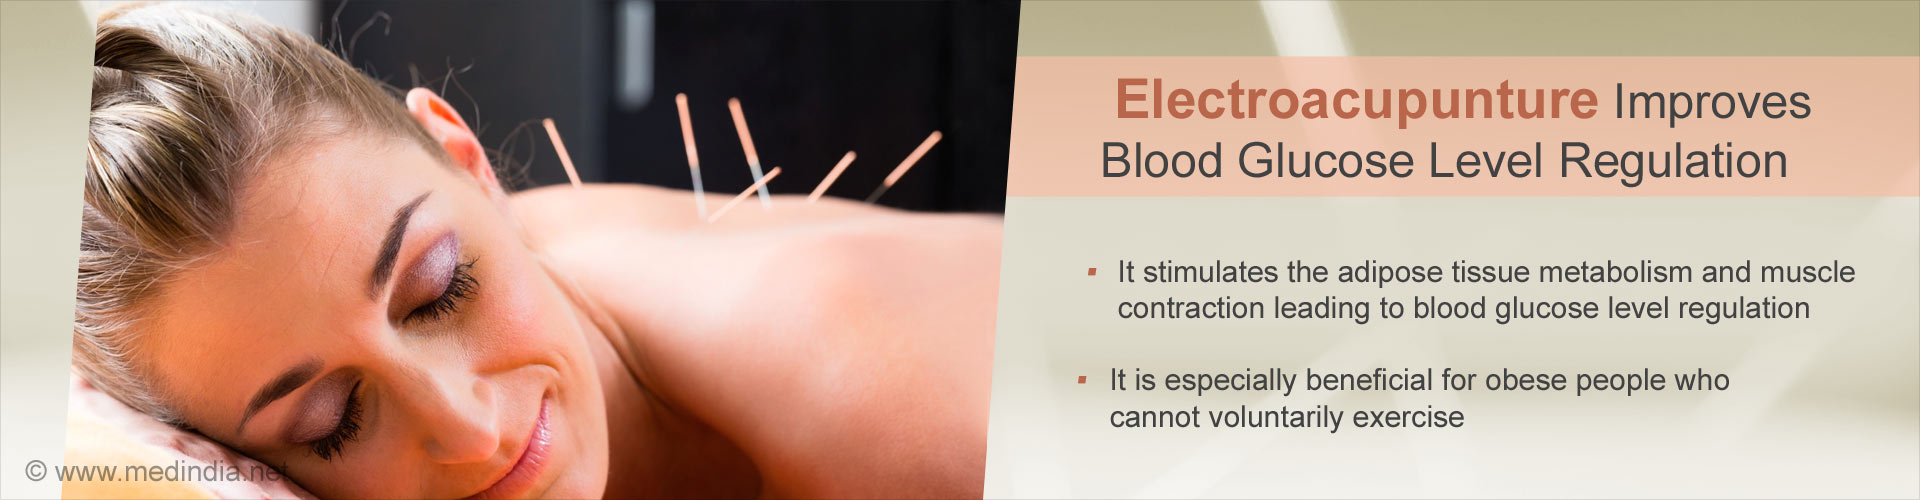 Electro-acupunture improves blood glucose level regulation
- It stimulates the adipose tissue metabolism and muscle contraction leading to blood glucose level regulation
- It is especially beneficial for obese people who cannot voluntarily exercise